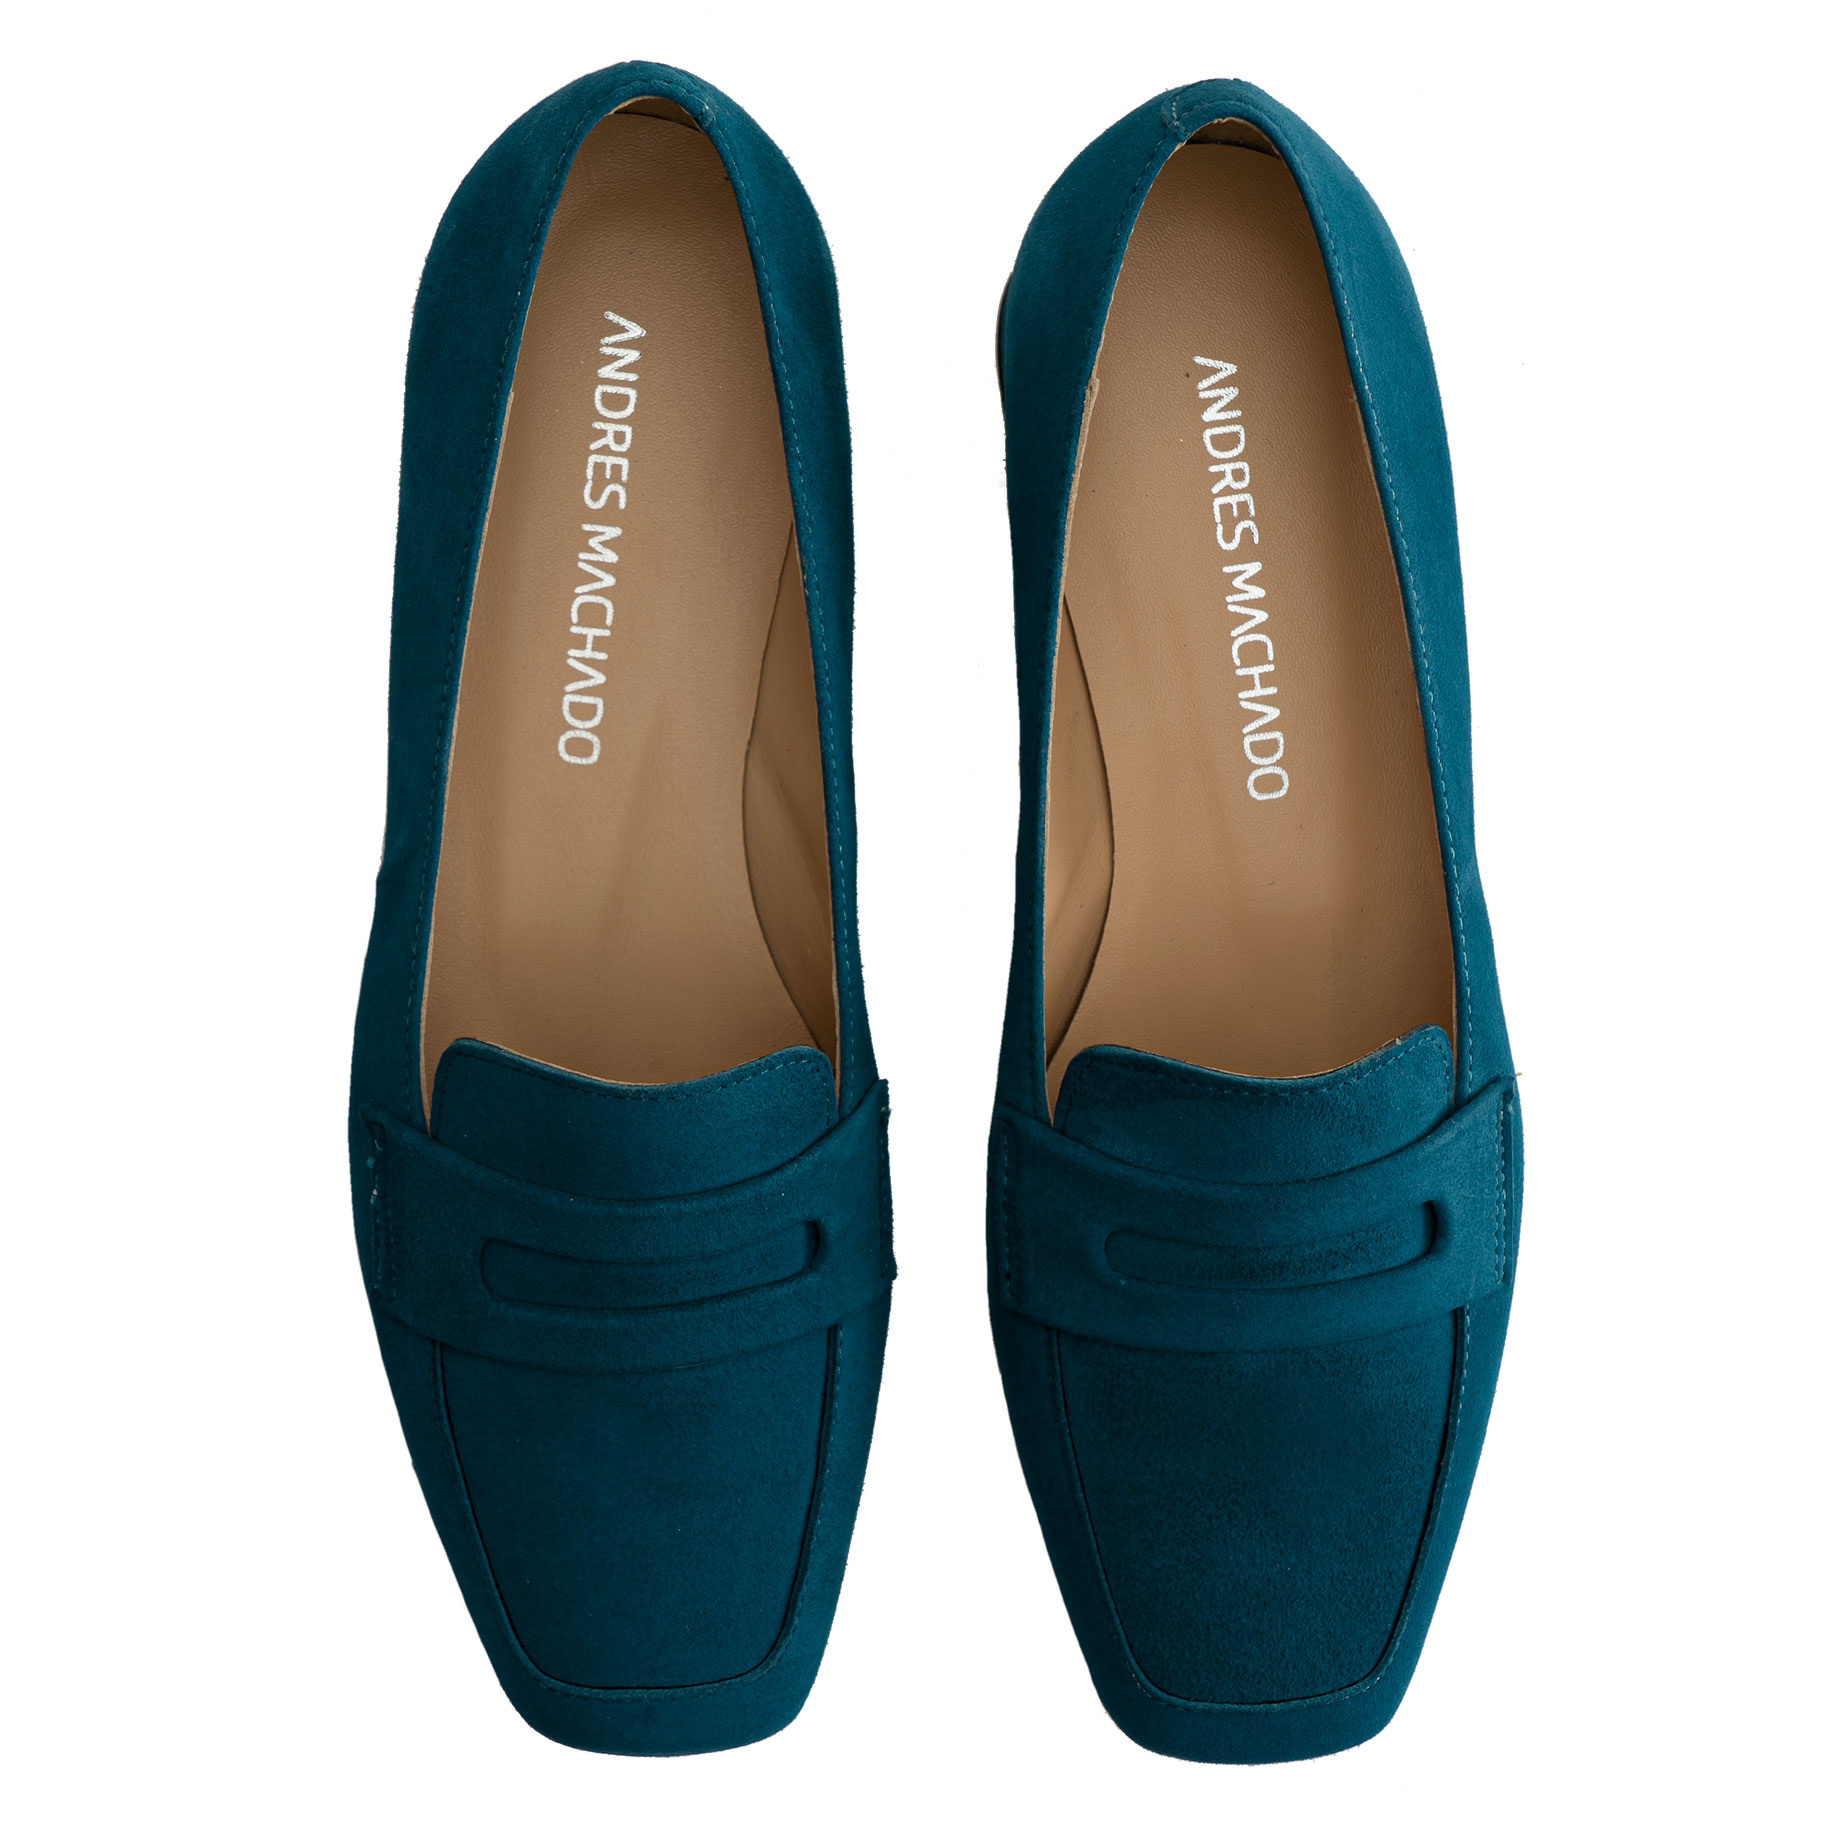 Moccasins in Blue Suede Leather 